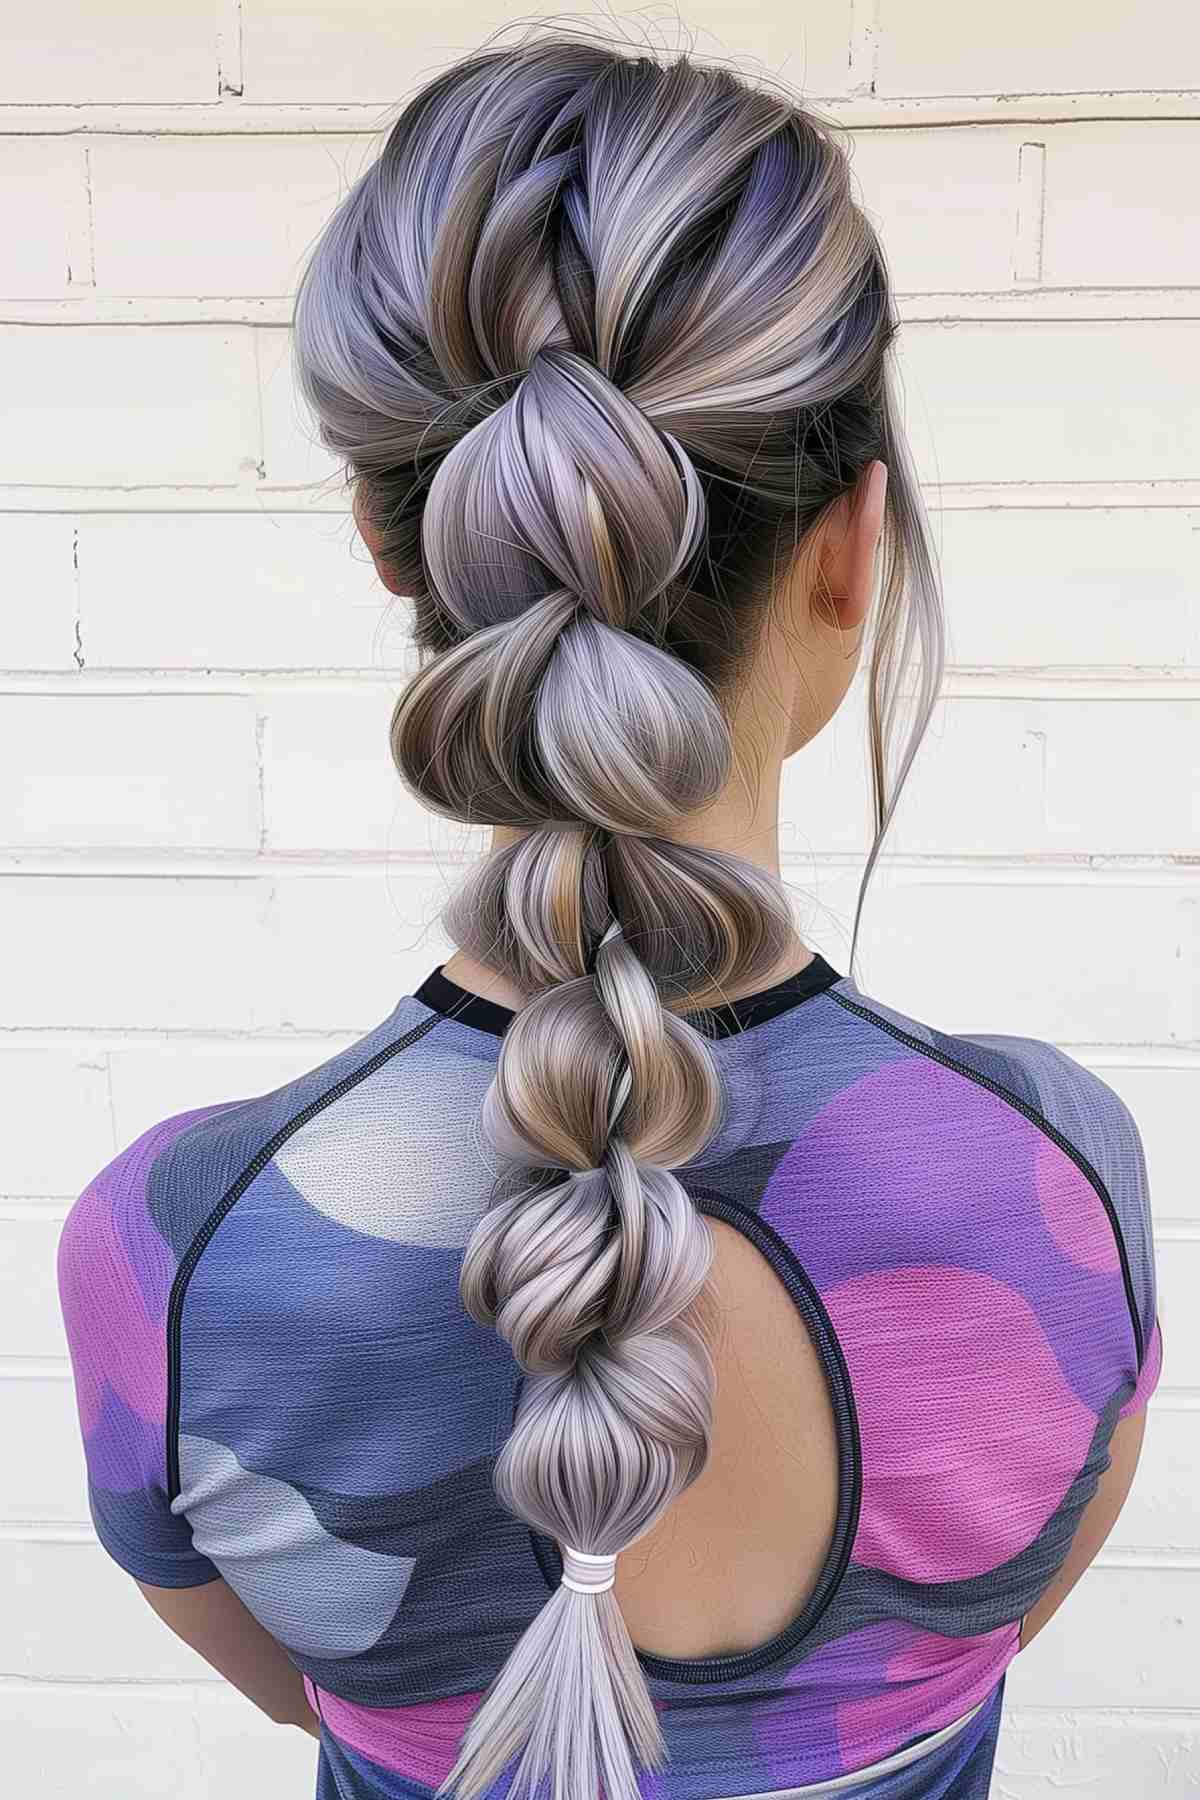 Sporty bubble braid hairstyle, starting with a French braid and transitioning to segmented bubbles, in a trendy silvery lavender color.